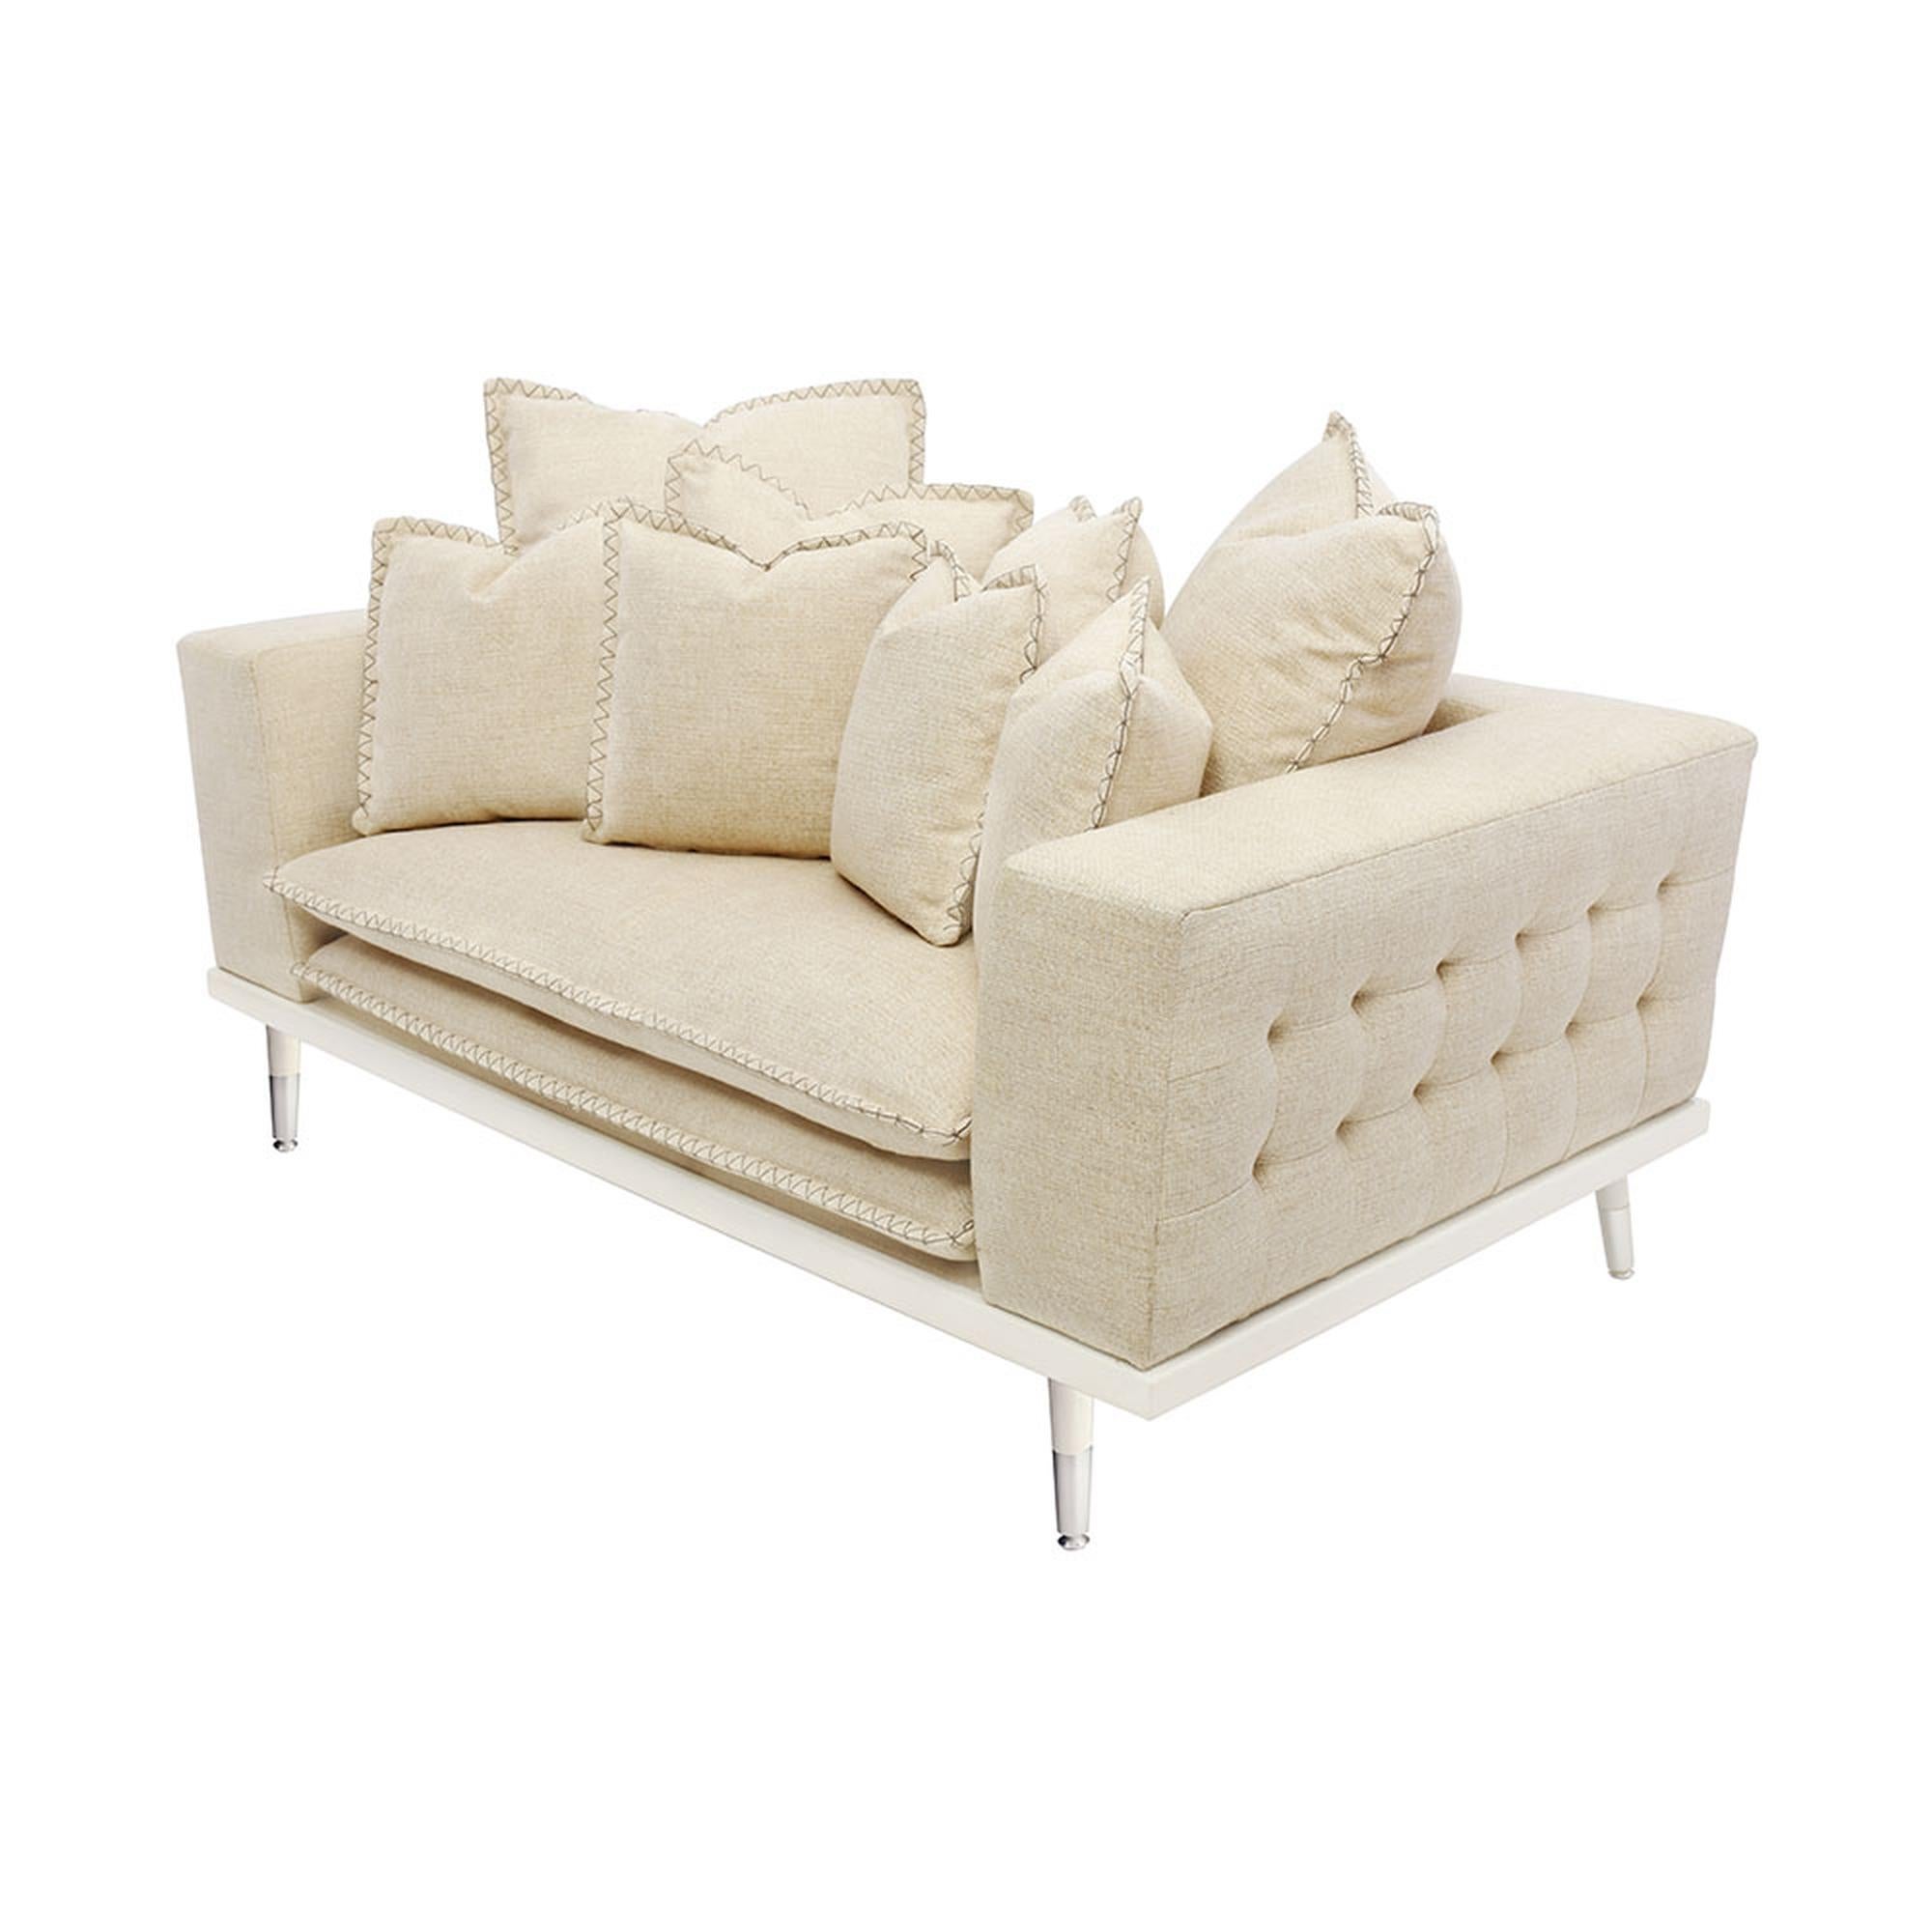 The Palisades loveseat is the perfect combination of relaxed coastal living and sophisticated design. With a wood frame composed of hand-lacquered natural nished wood, this arm chair boasts clean lines, ease, coastal style, and comfort at the heart